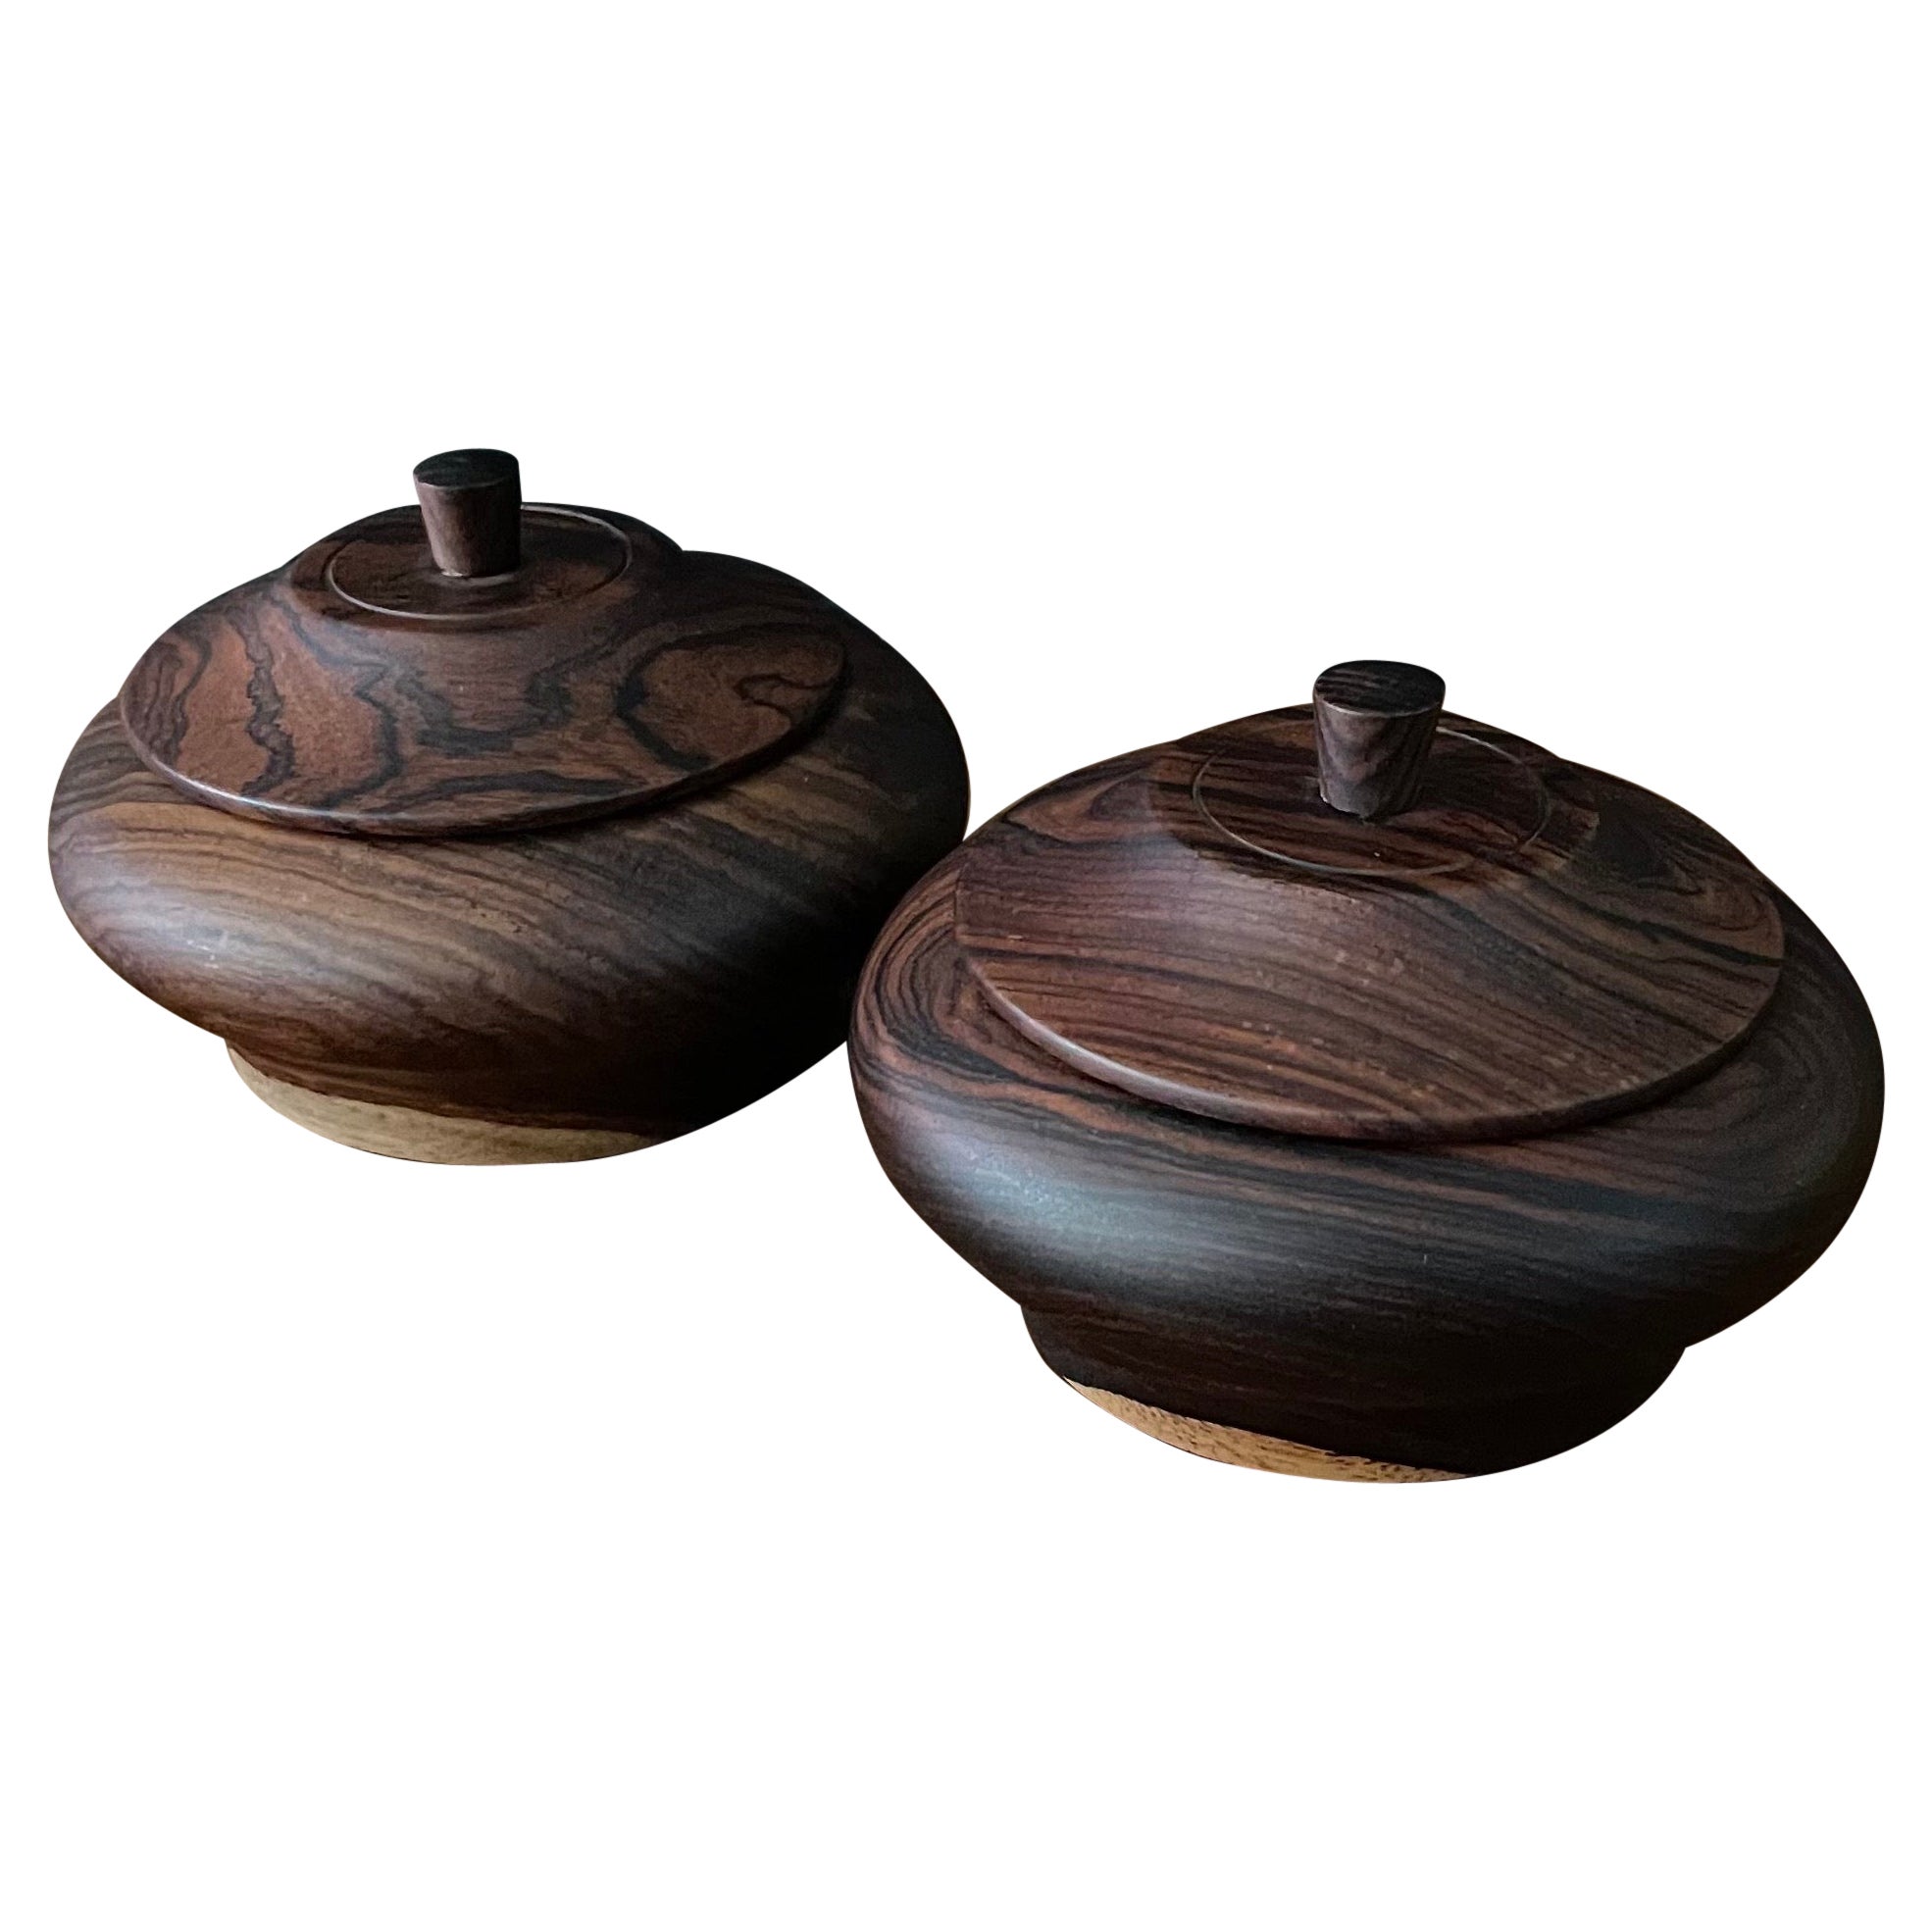 Pair of Decorative Cocobolo / Rosewood Lidded Cannisters